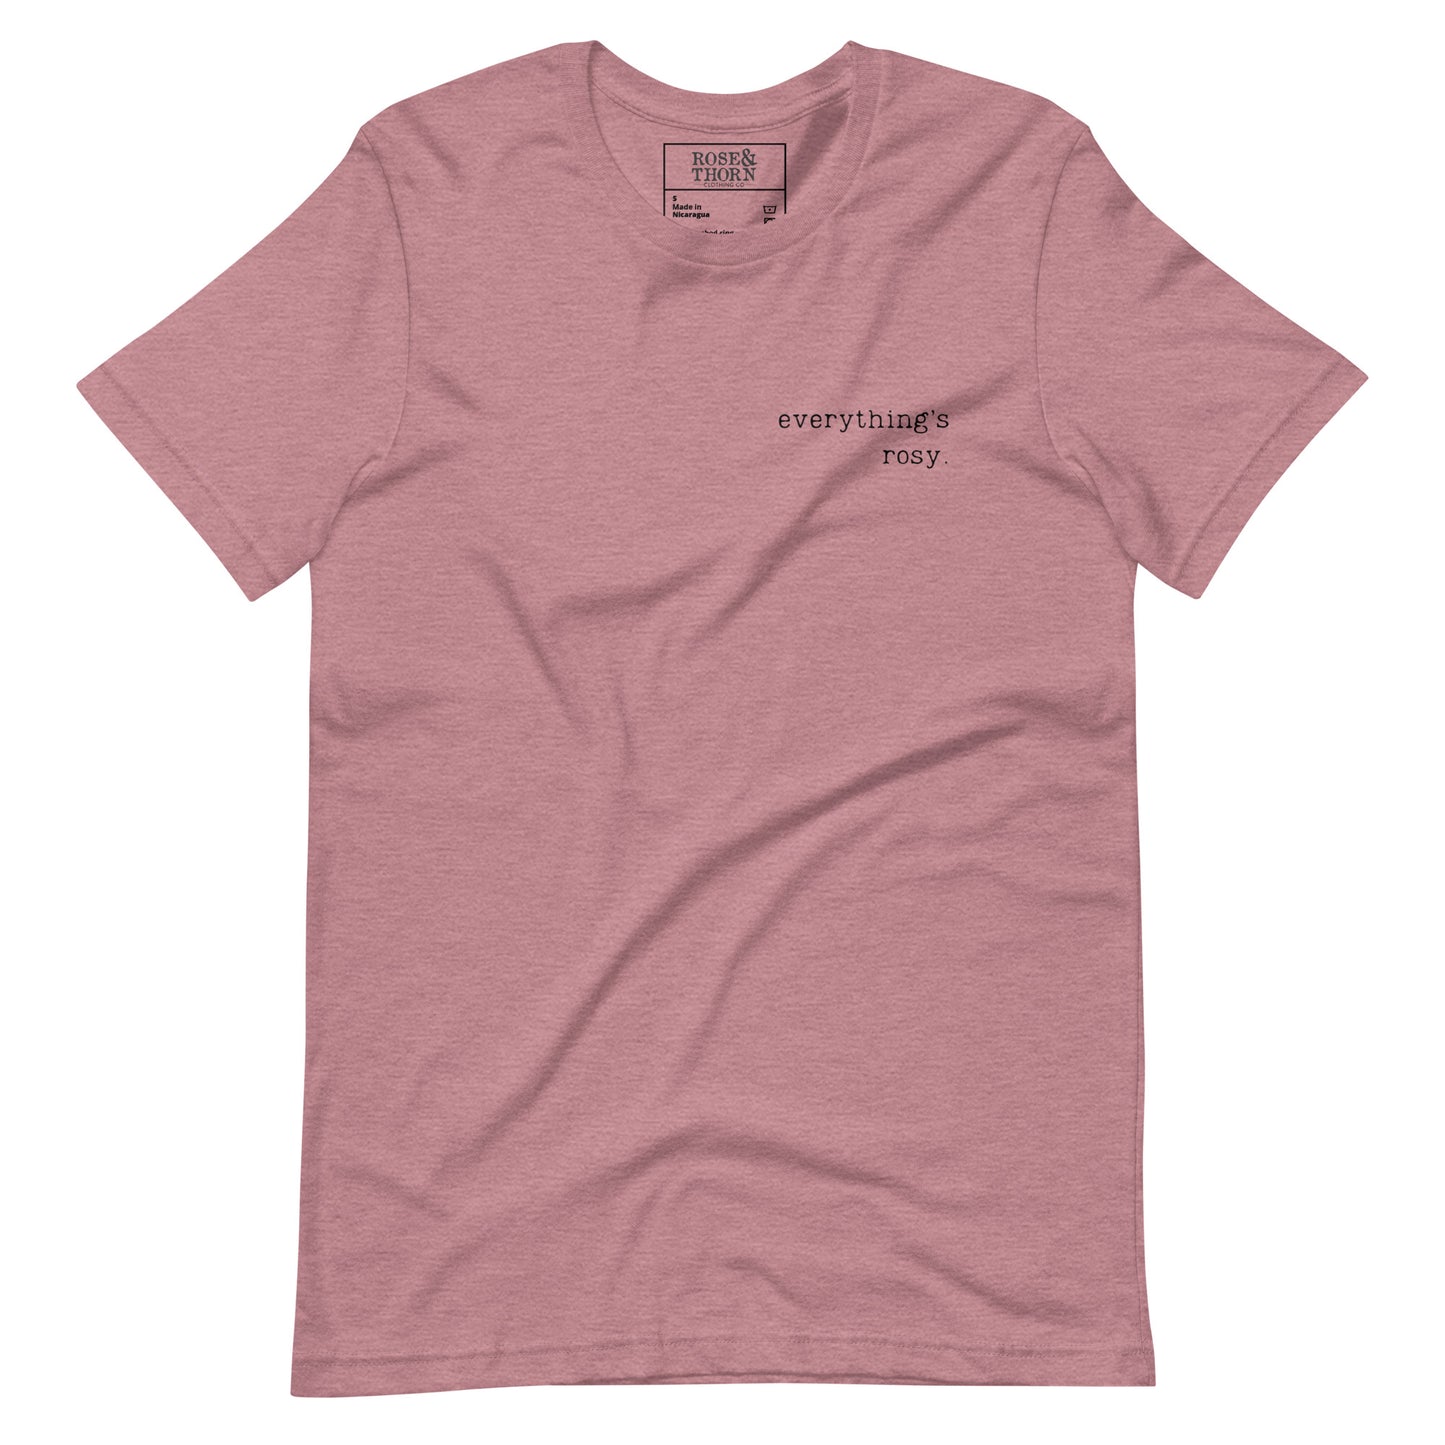 everything's rosy tee